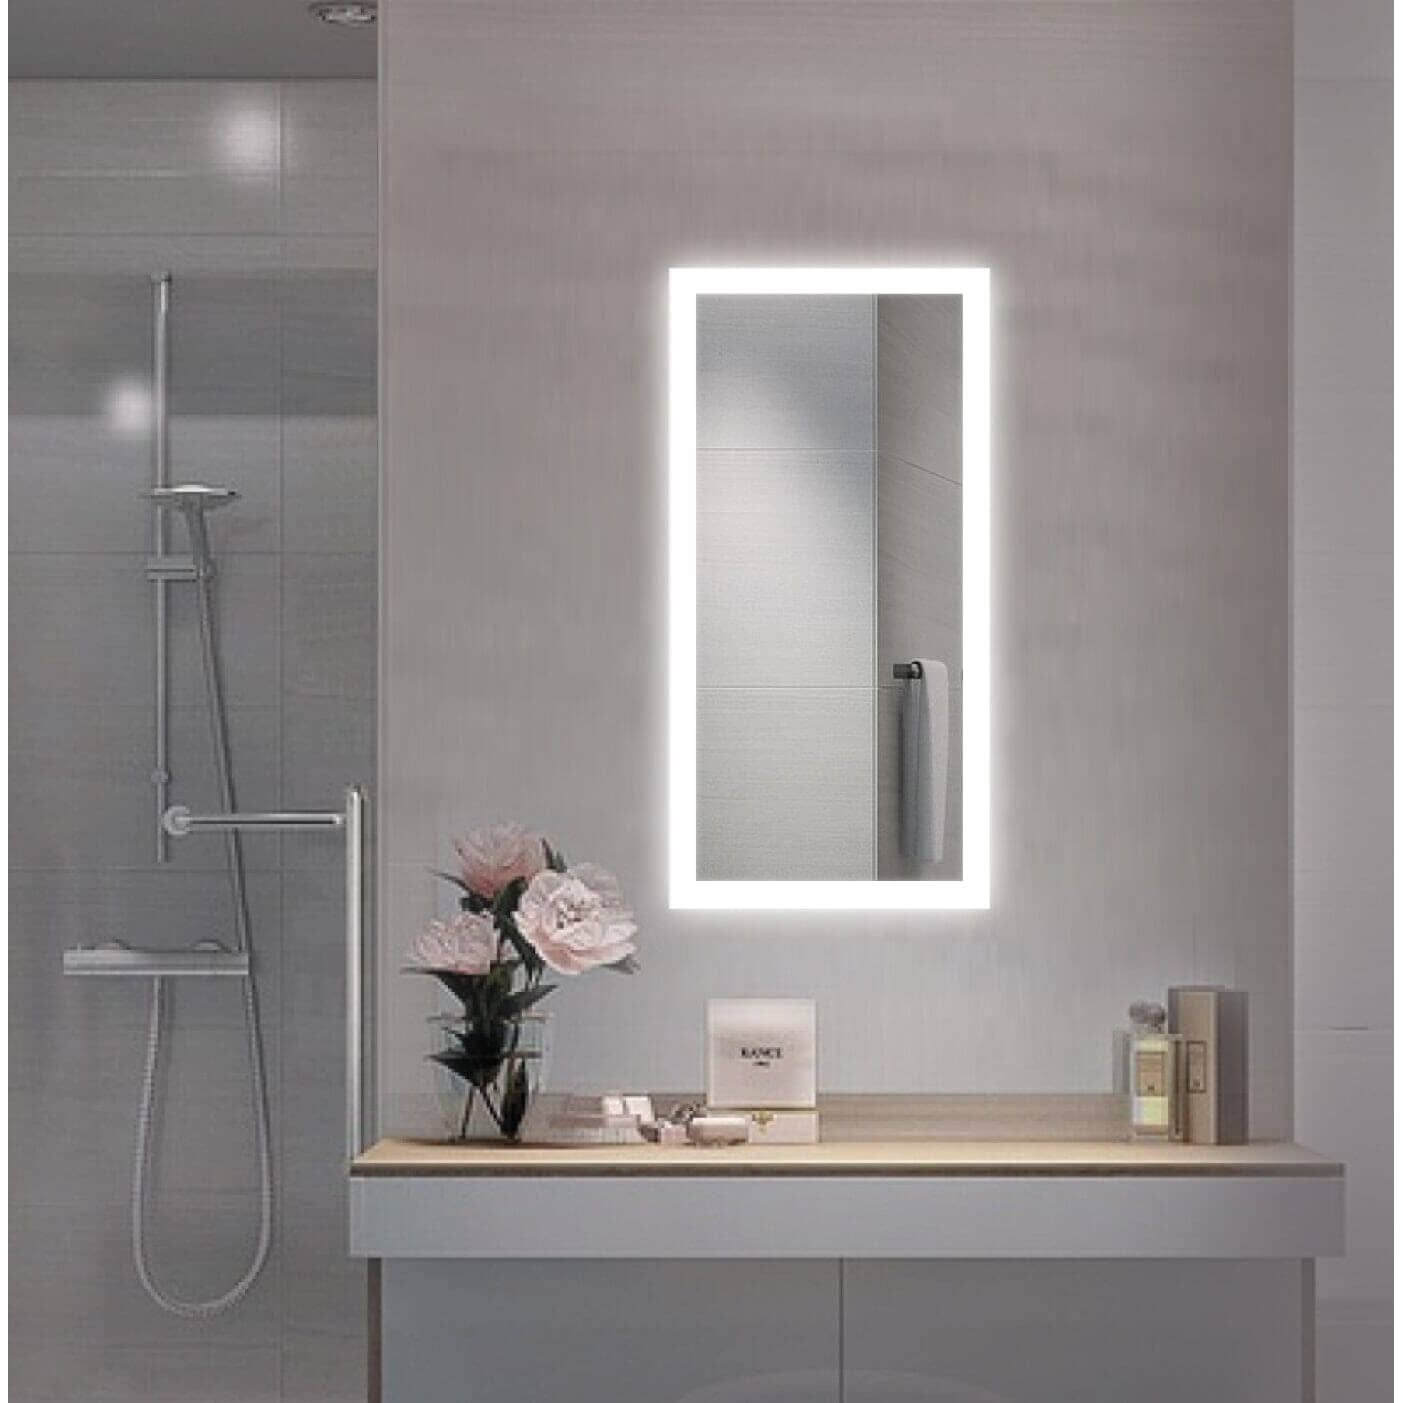 Luxurious bathroom w/ Krugg Bijou 15 X 30 LED mirror complemented by a glass shower stall